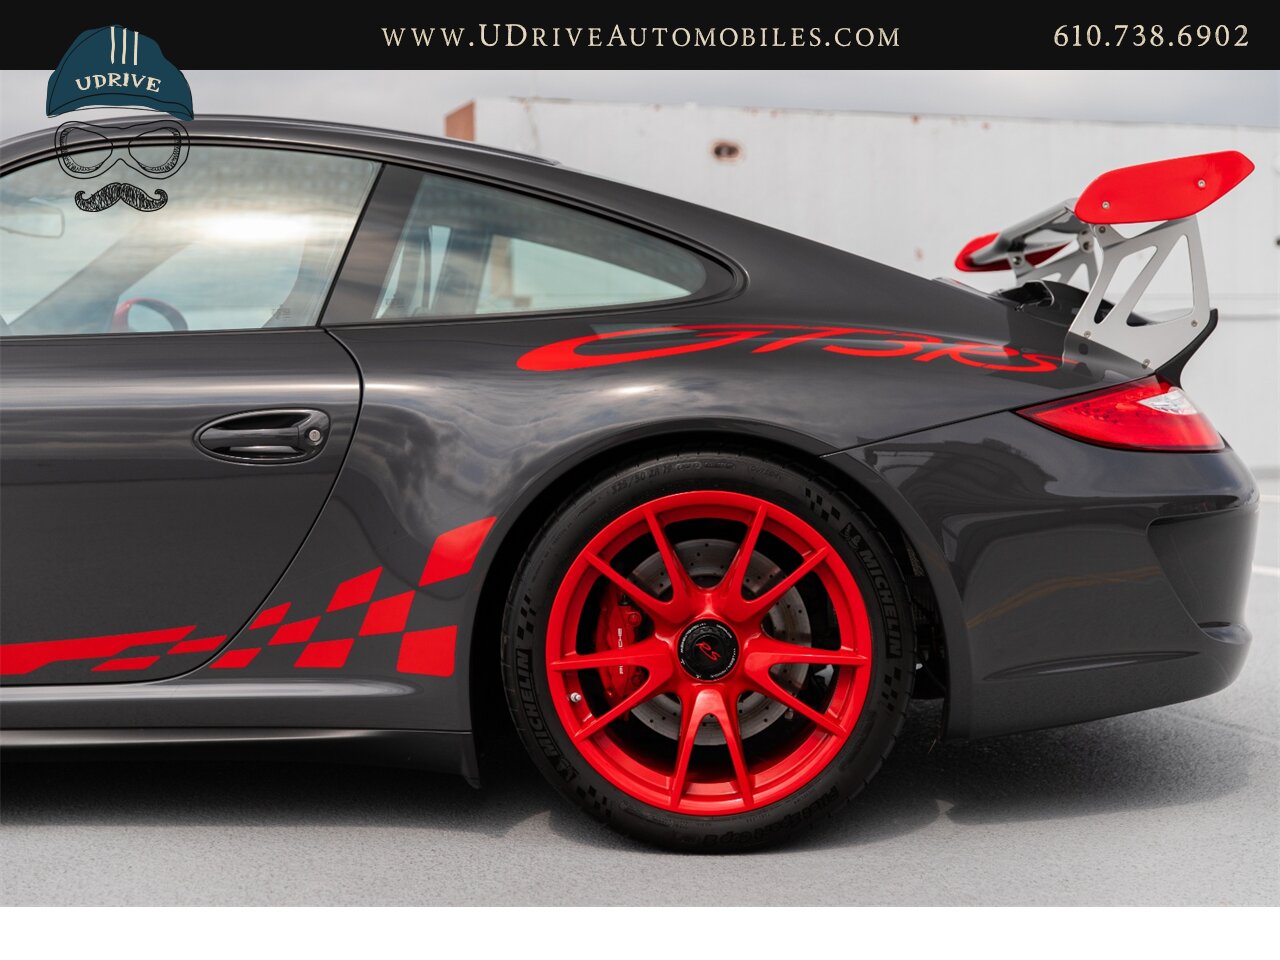 2010 Porsche 911 GT3 RS 1k Miles Dev Red Stitching Throughout  Front Axle Lift Sport Chrono 997.2 - Photo 32 - West Chester, PA 19382